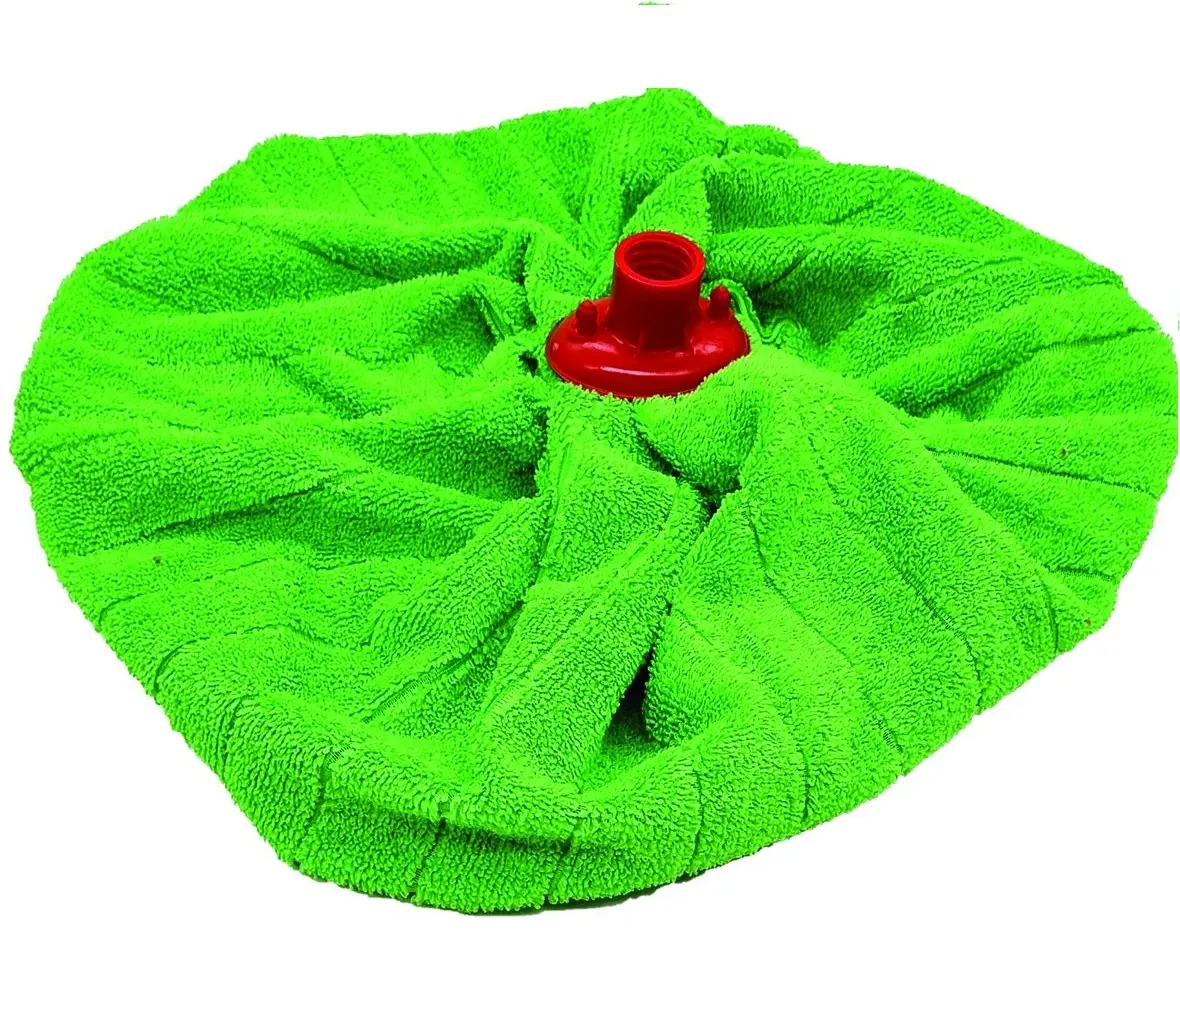 Hot sale Absorbent Quick Dry Microfiber Cloth Towel Floor Flat Cleaning Towel Made in Turkey